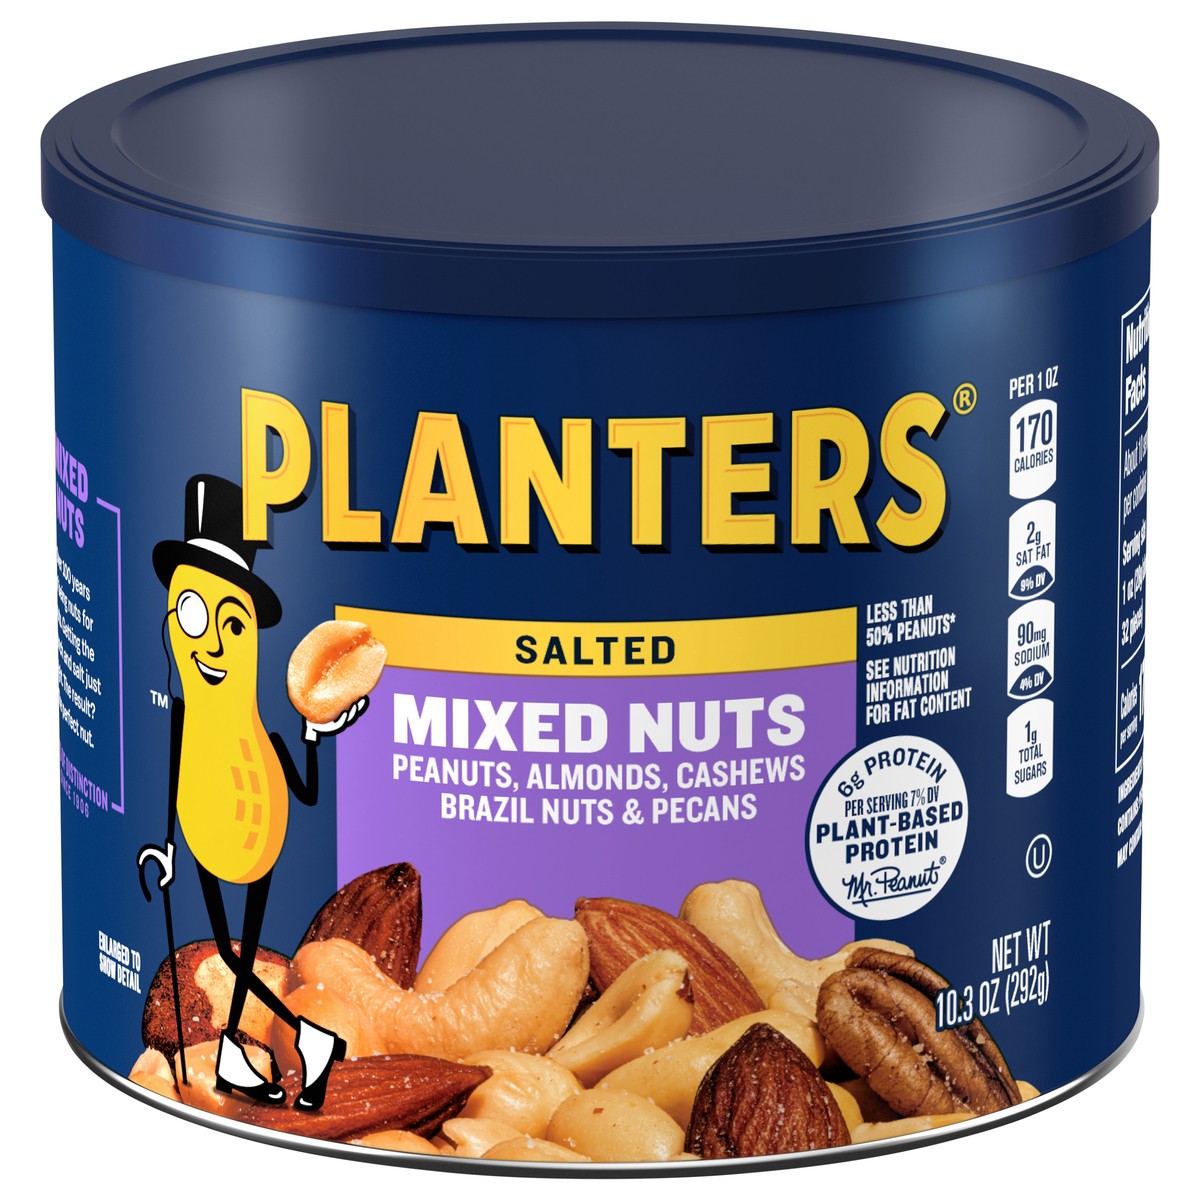 slide 1 of 1, Planters Mixed Nuts Less Than 50% Peanuts with Peanuts, Almonds, Cashews, Hazelnuts & Pecans, 10.3 oz Canister, 